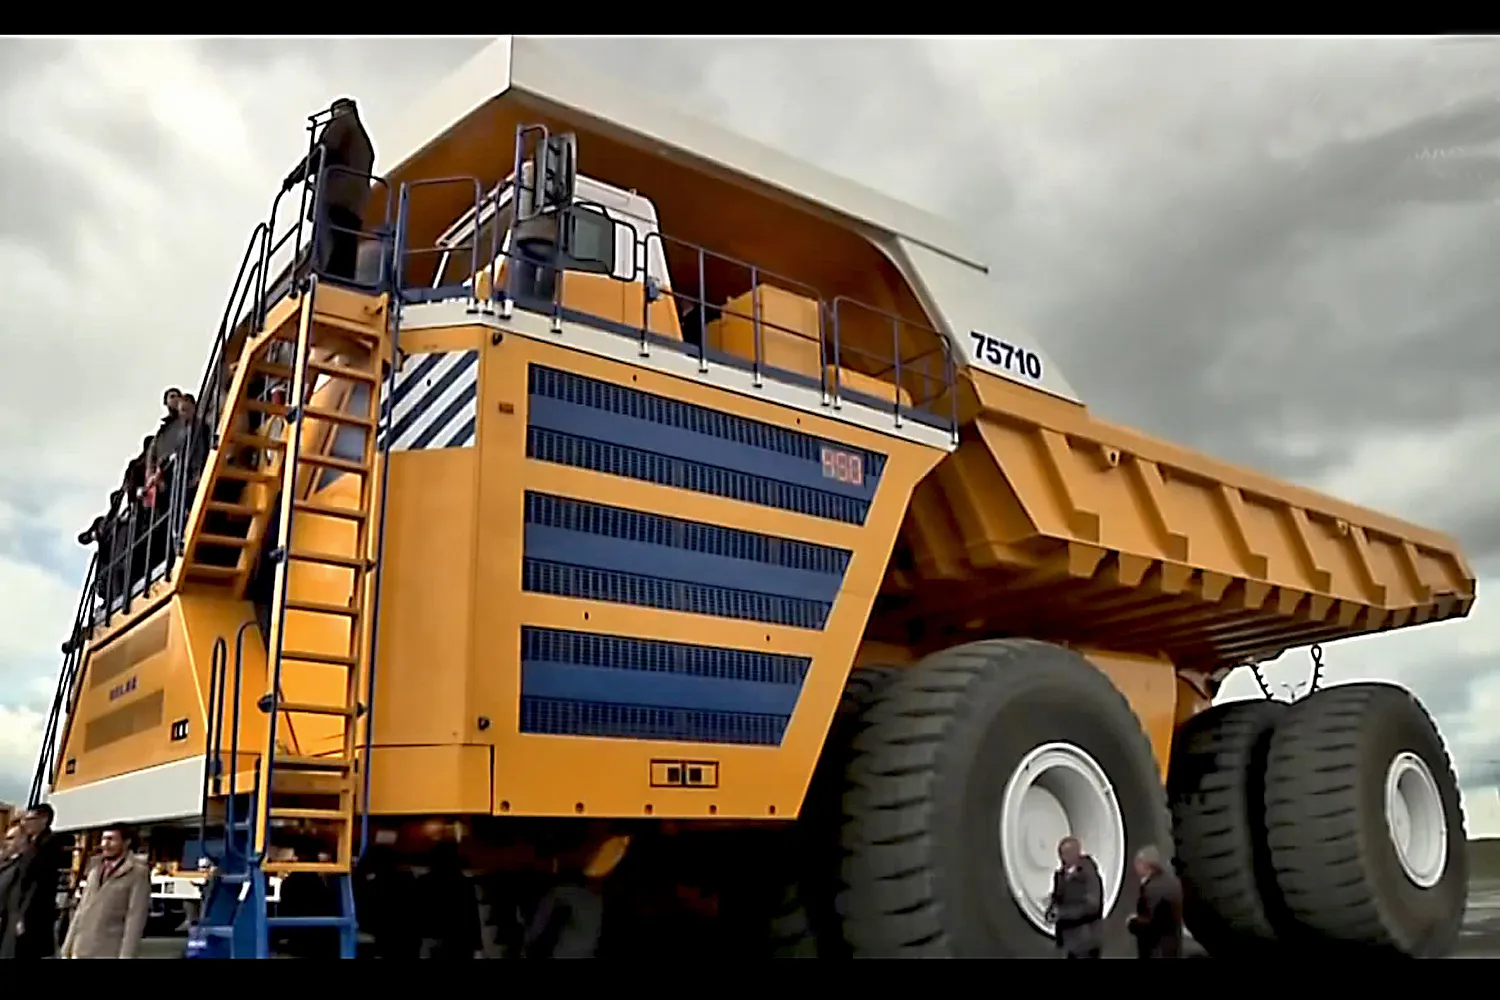 This Is the World's Largest Dump Truck | Smart News| Smithsonian Magazine